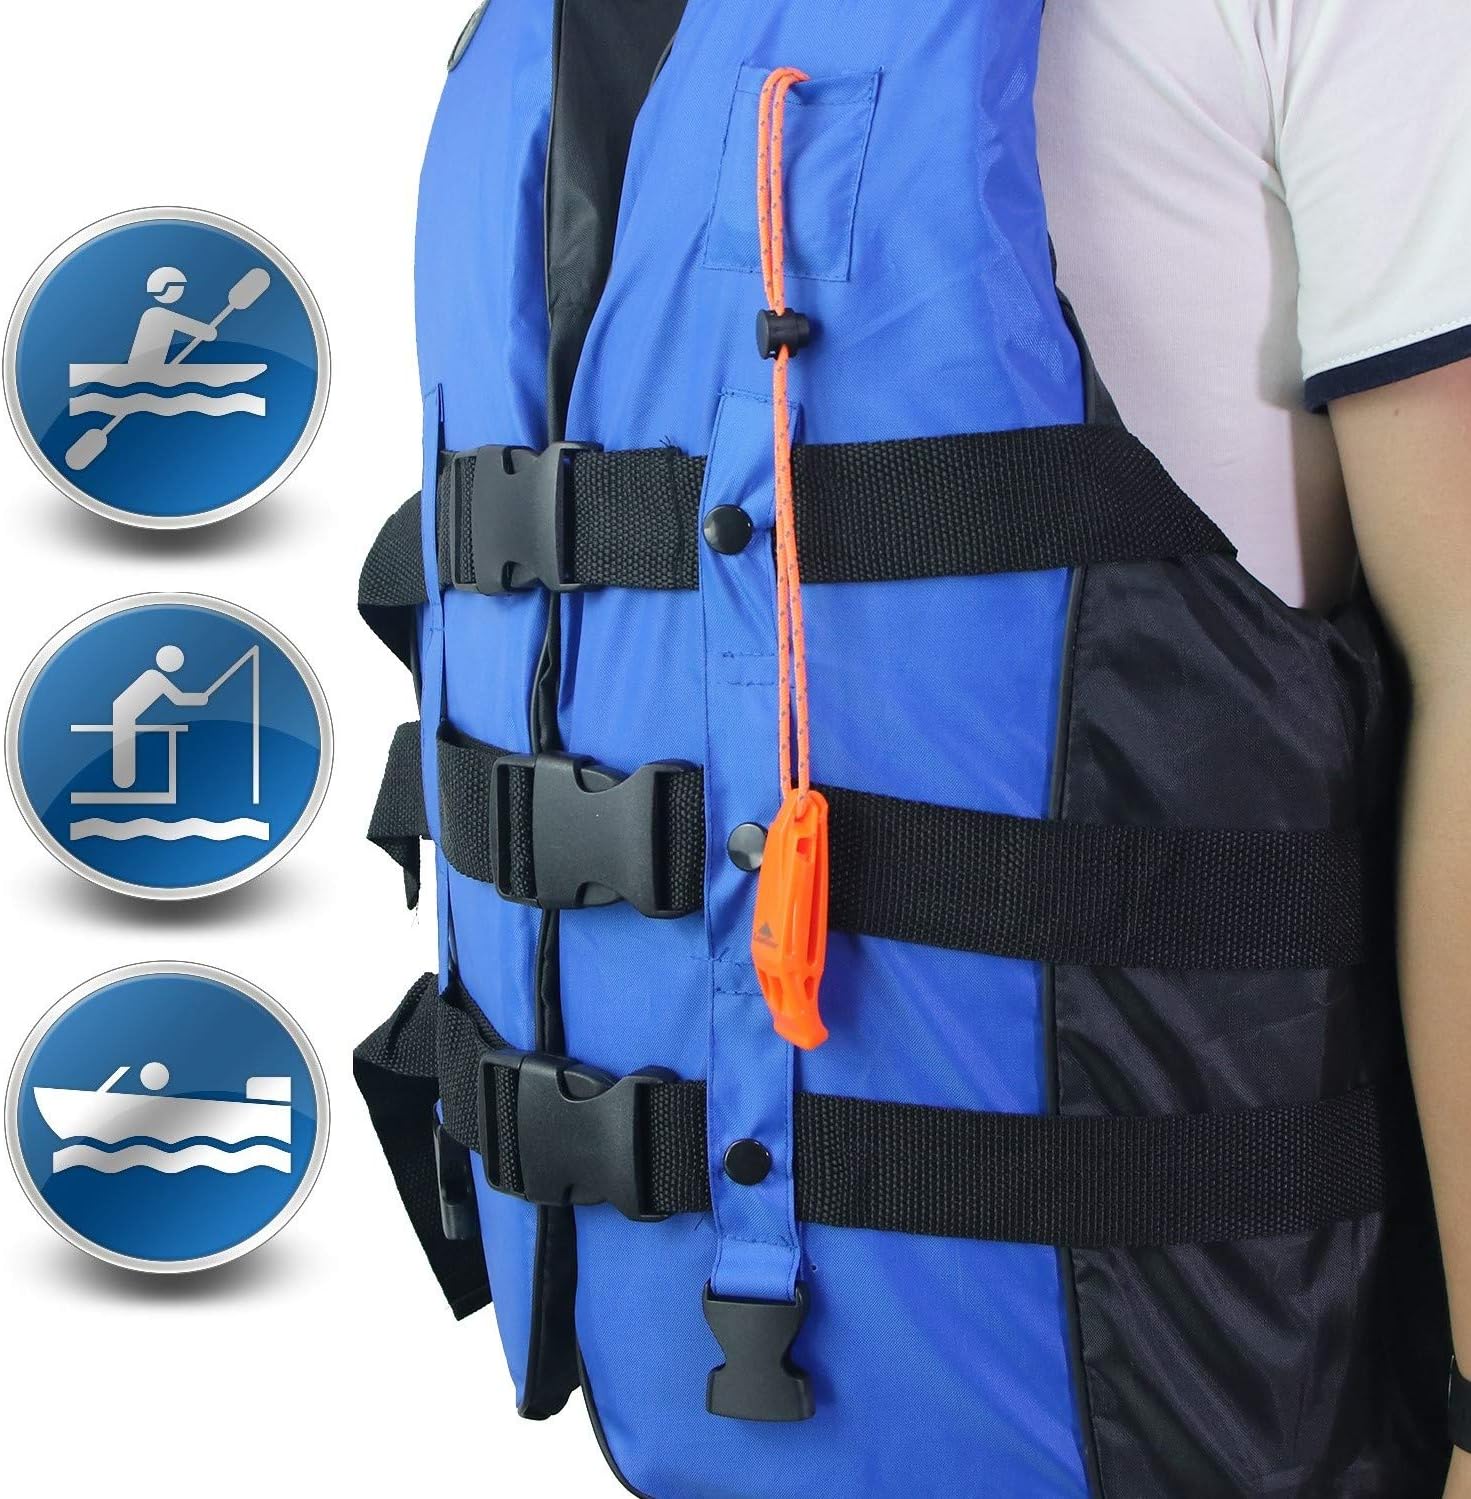 Personal floatation device with emergency whistle attached